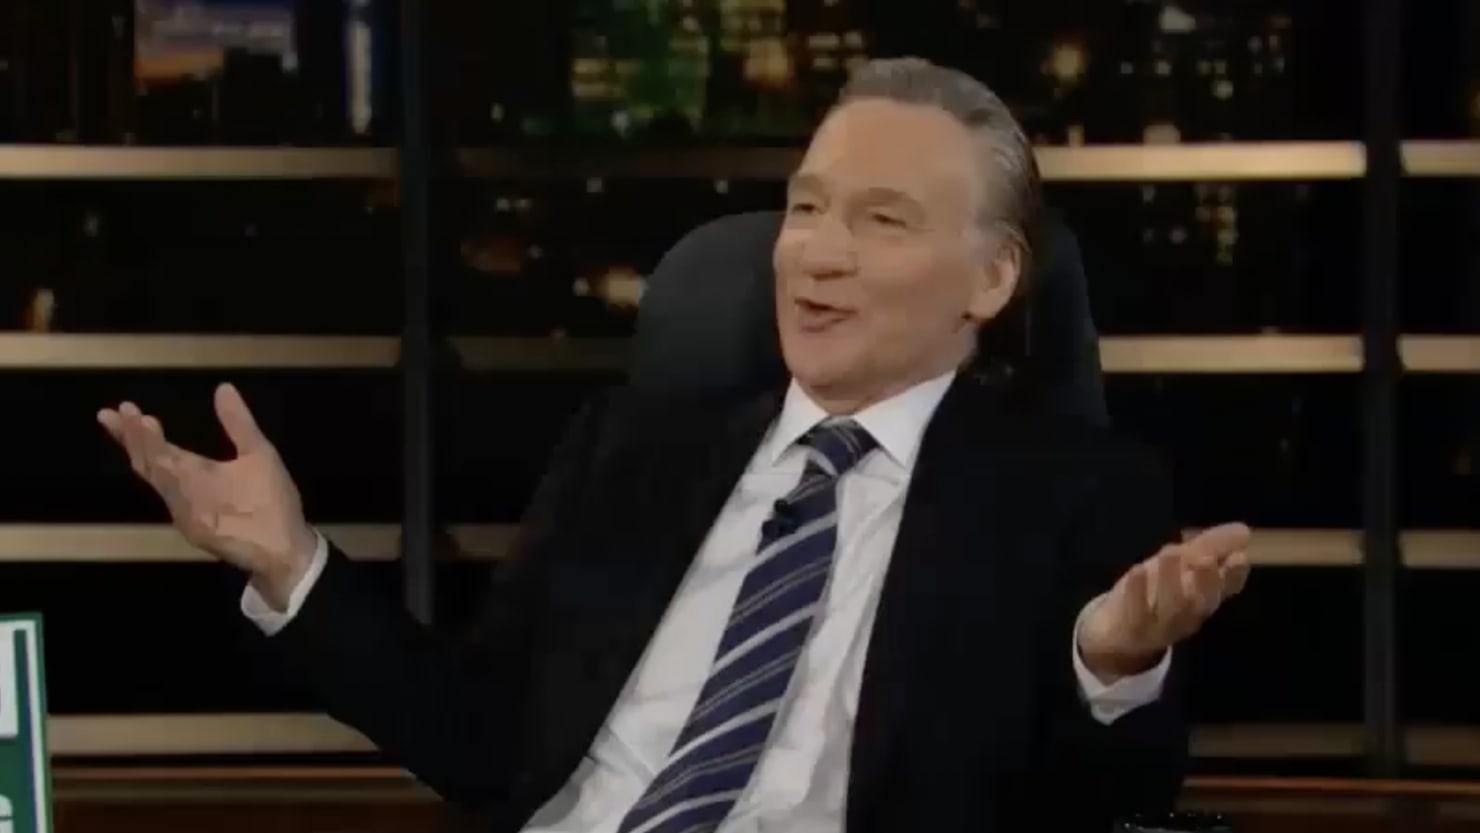 Bill Maher defends Armie Hammer and blames his accusers